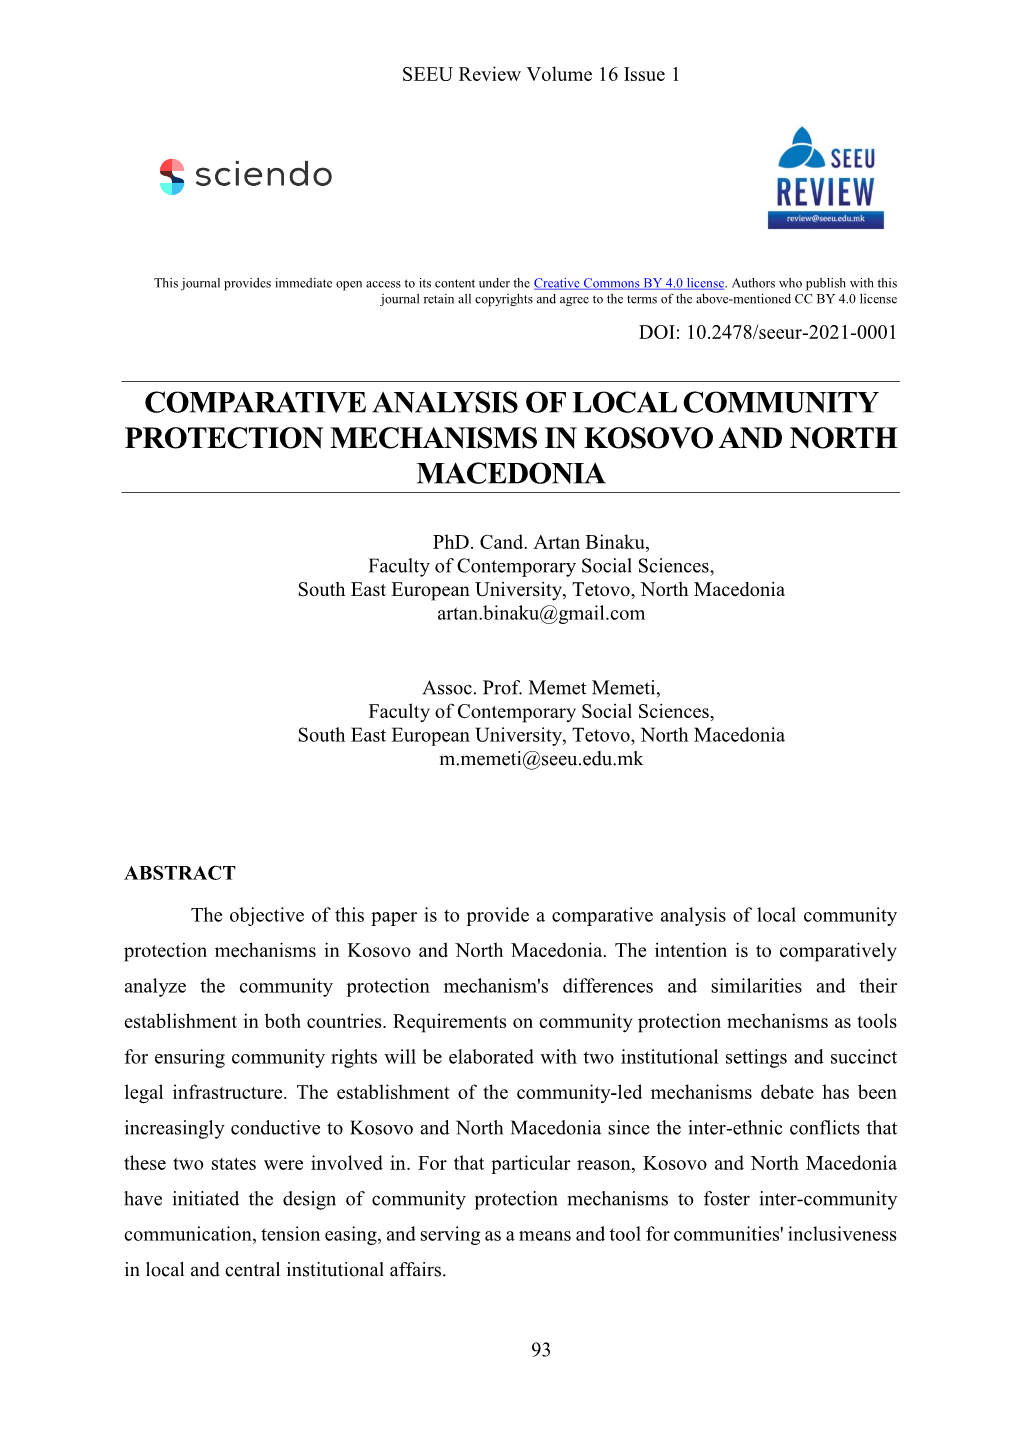 Comparative Analysis of Local Community Protection Mechanisms in Kosovo and North Macedonia